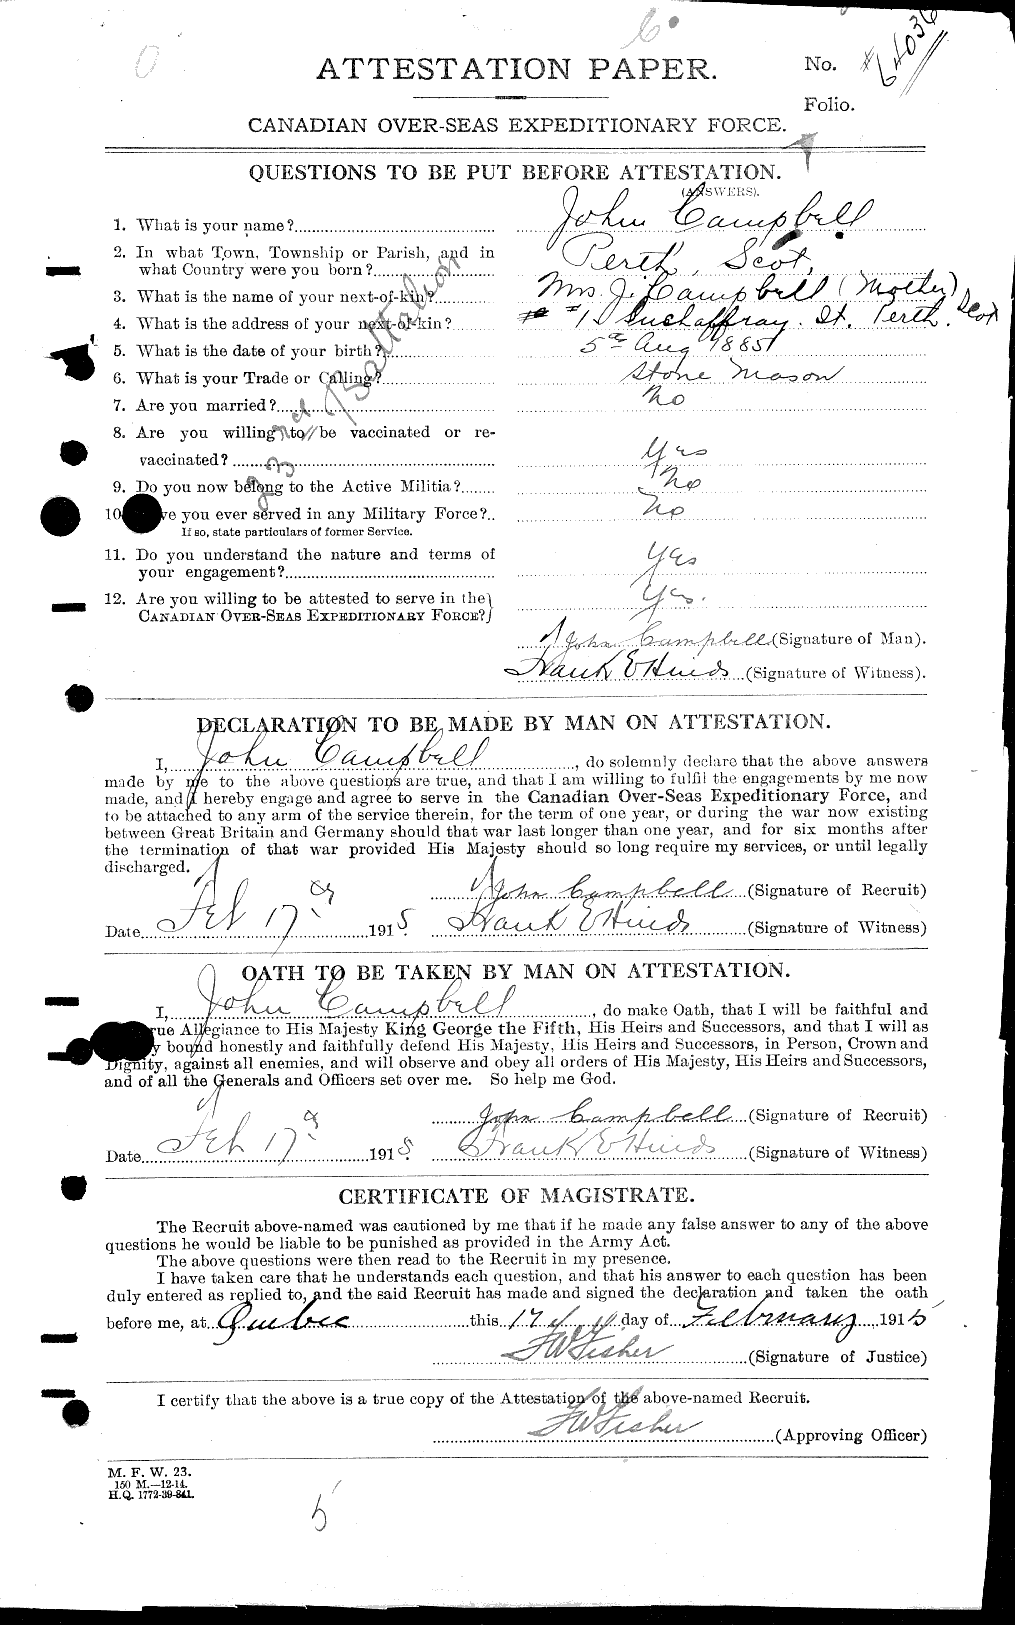 Personnel Records of the First World War - CEF 006804a